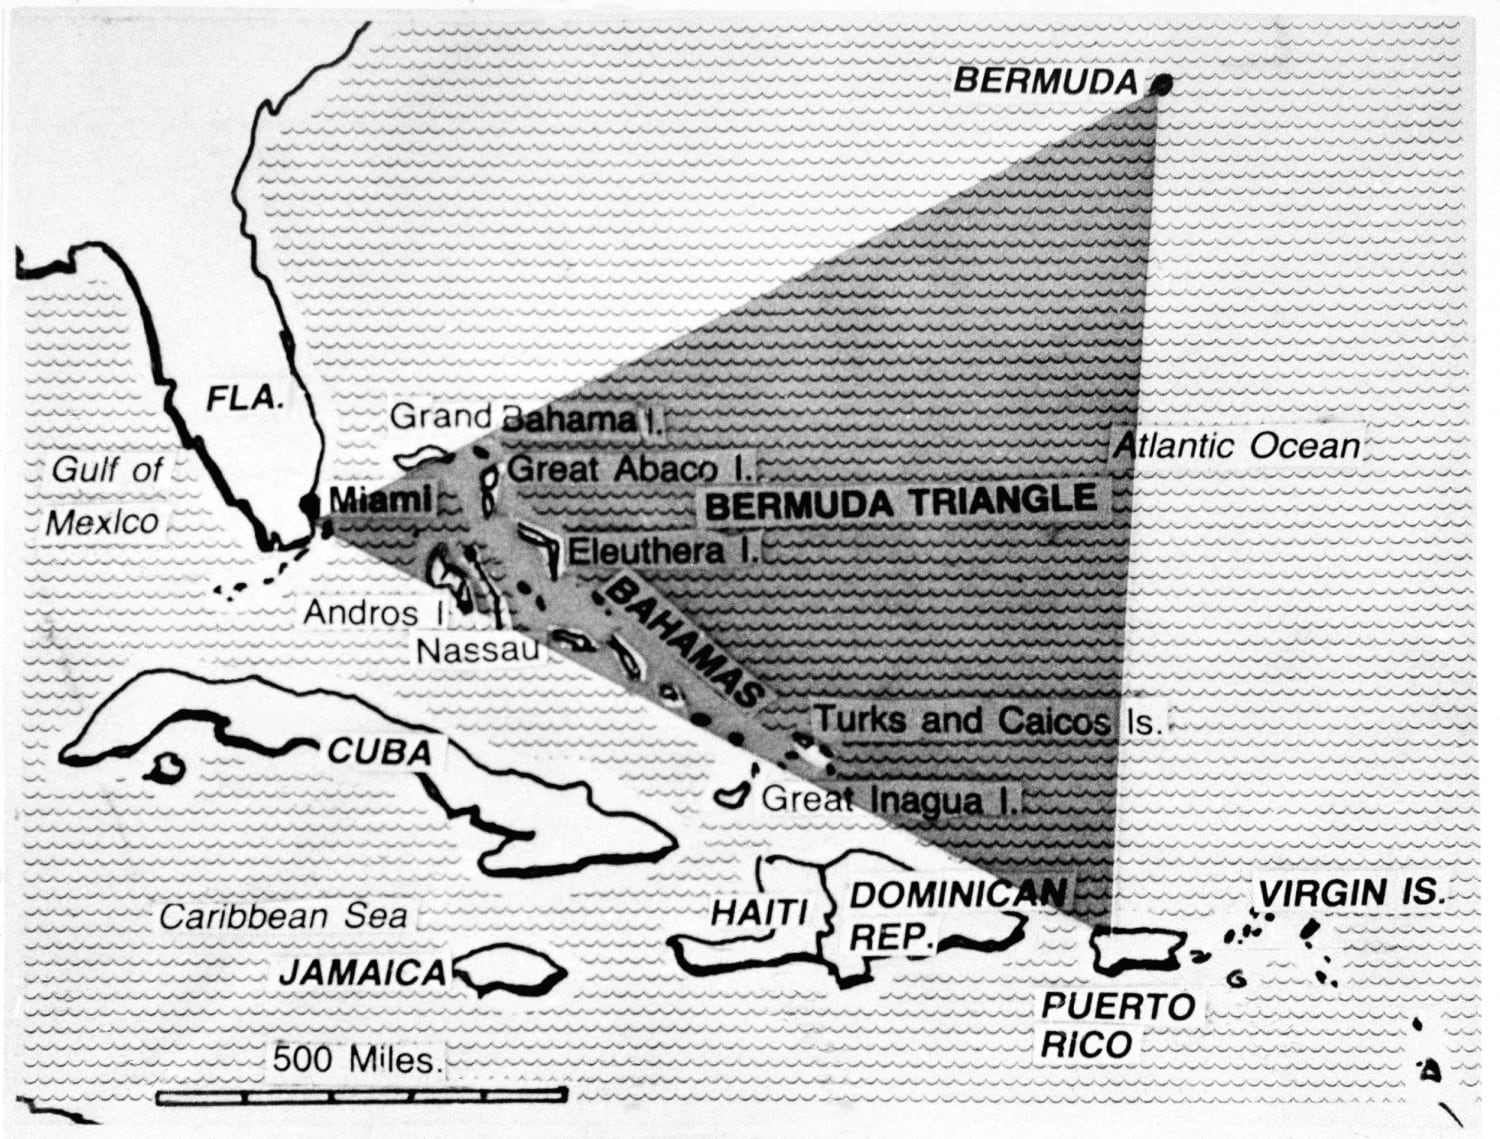 Bermuda Triangle Mystery Solved? Not Likely, Says Meteorologist